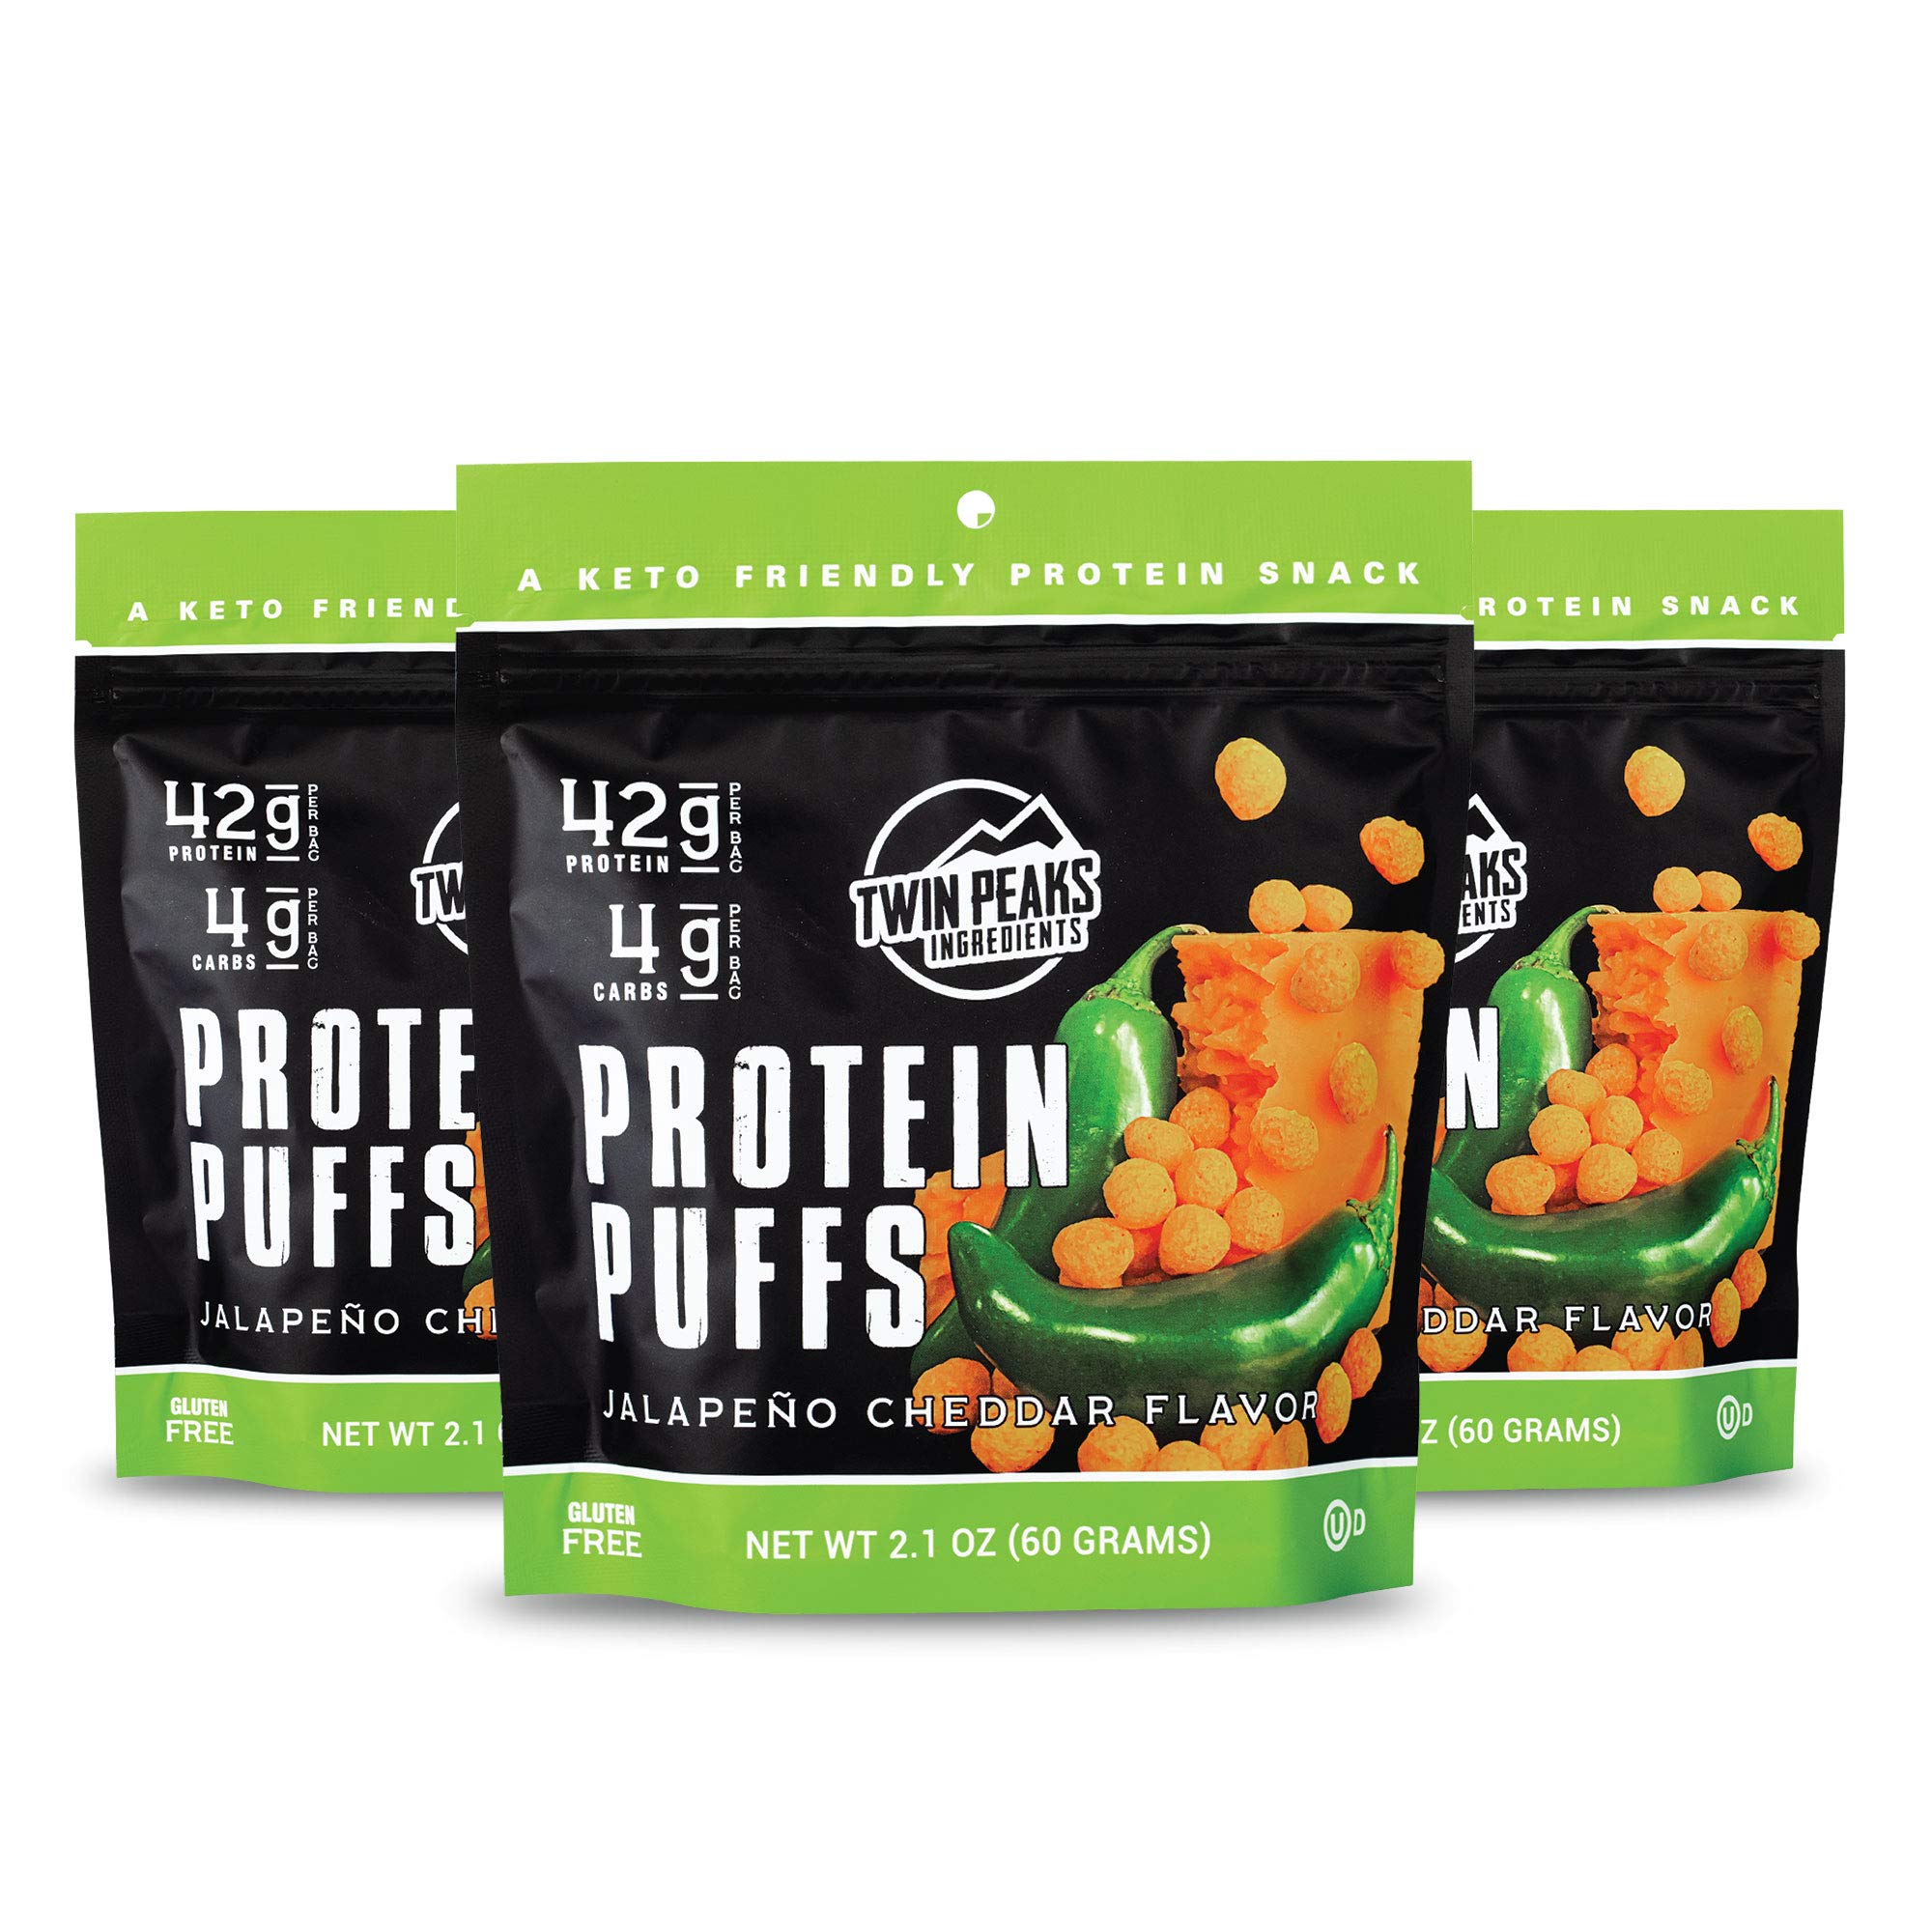 Twin Peaks Low Carb, Keto Friendly Protein Puffs, 3 Bags of Jalapeno Cheddar Flavor Puffs + 1 Jug Nacho Cheese Flavor Puffs